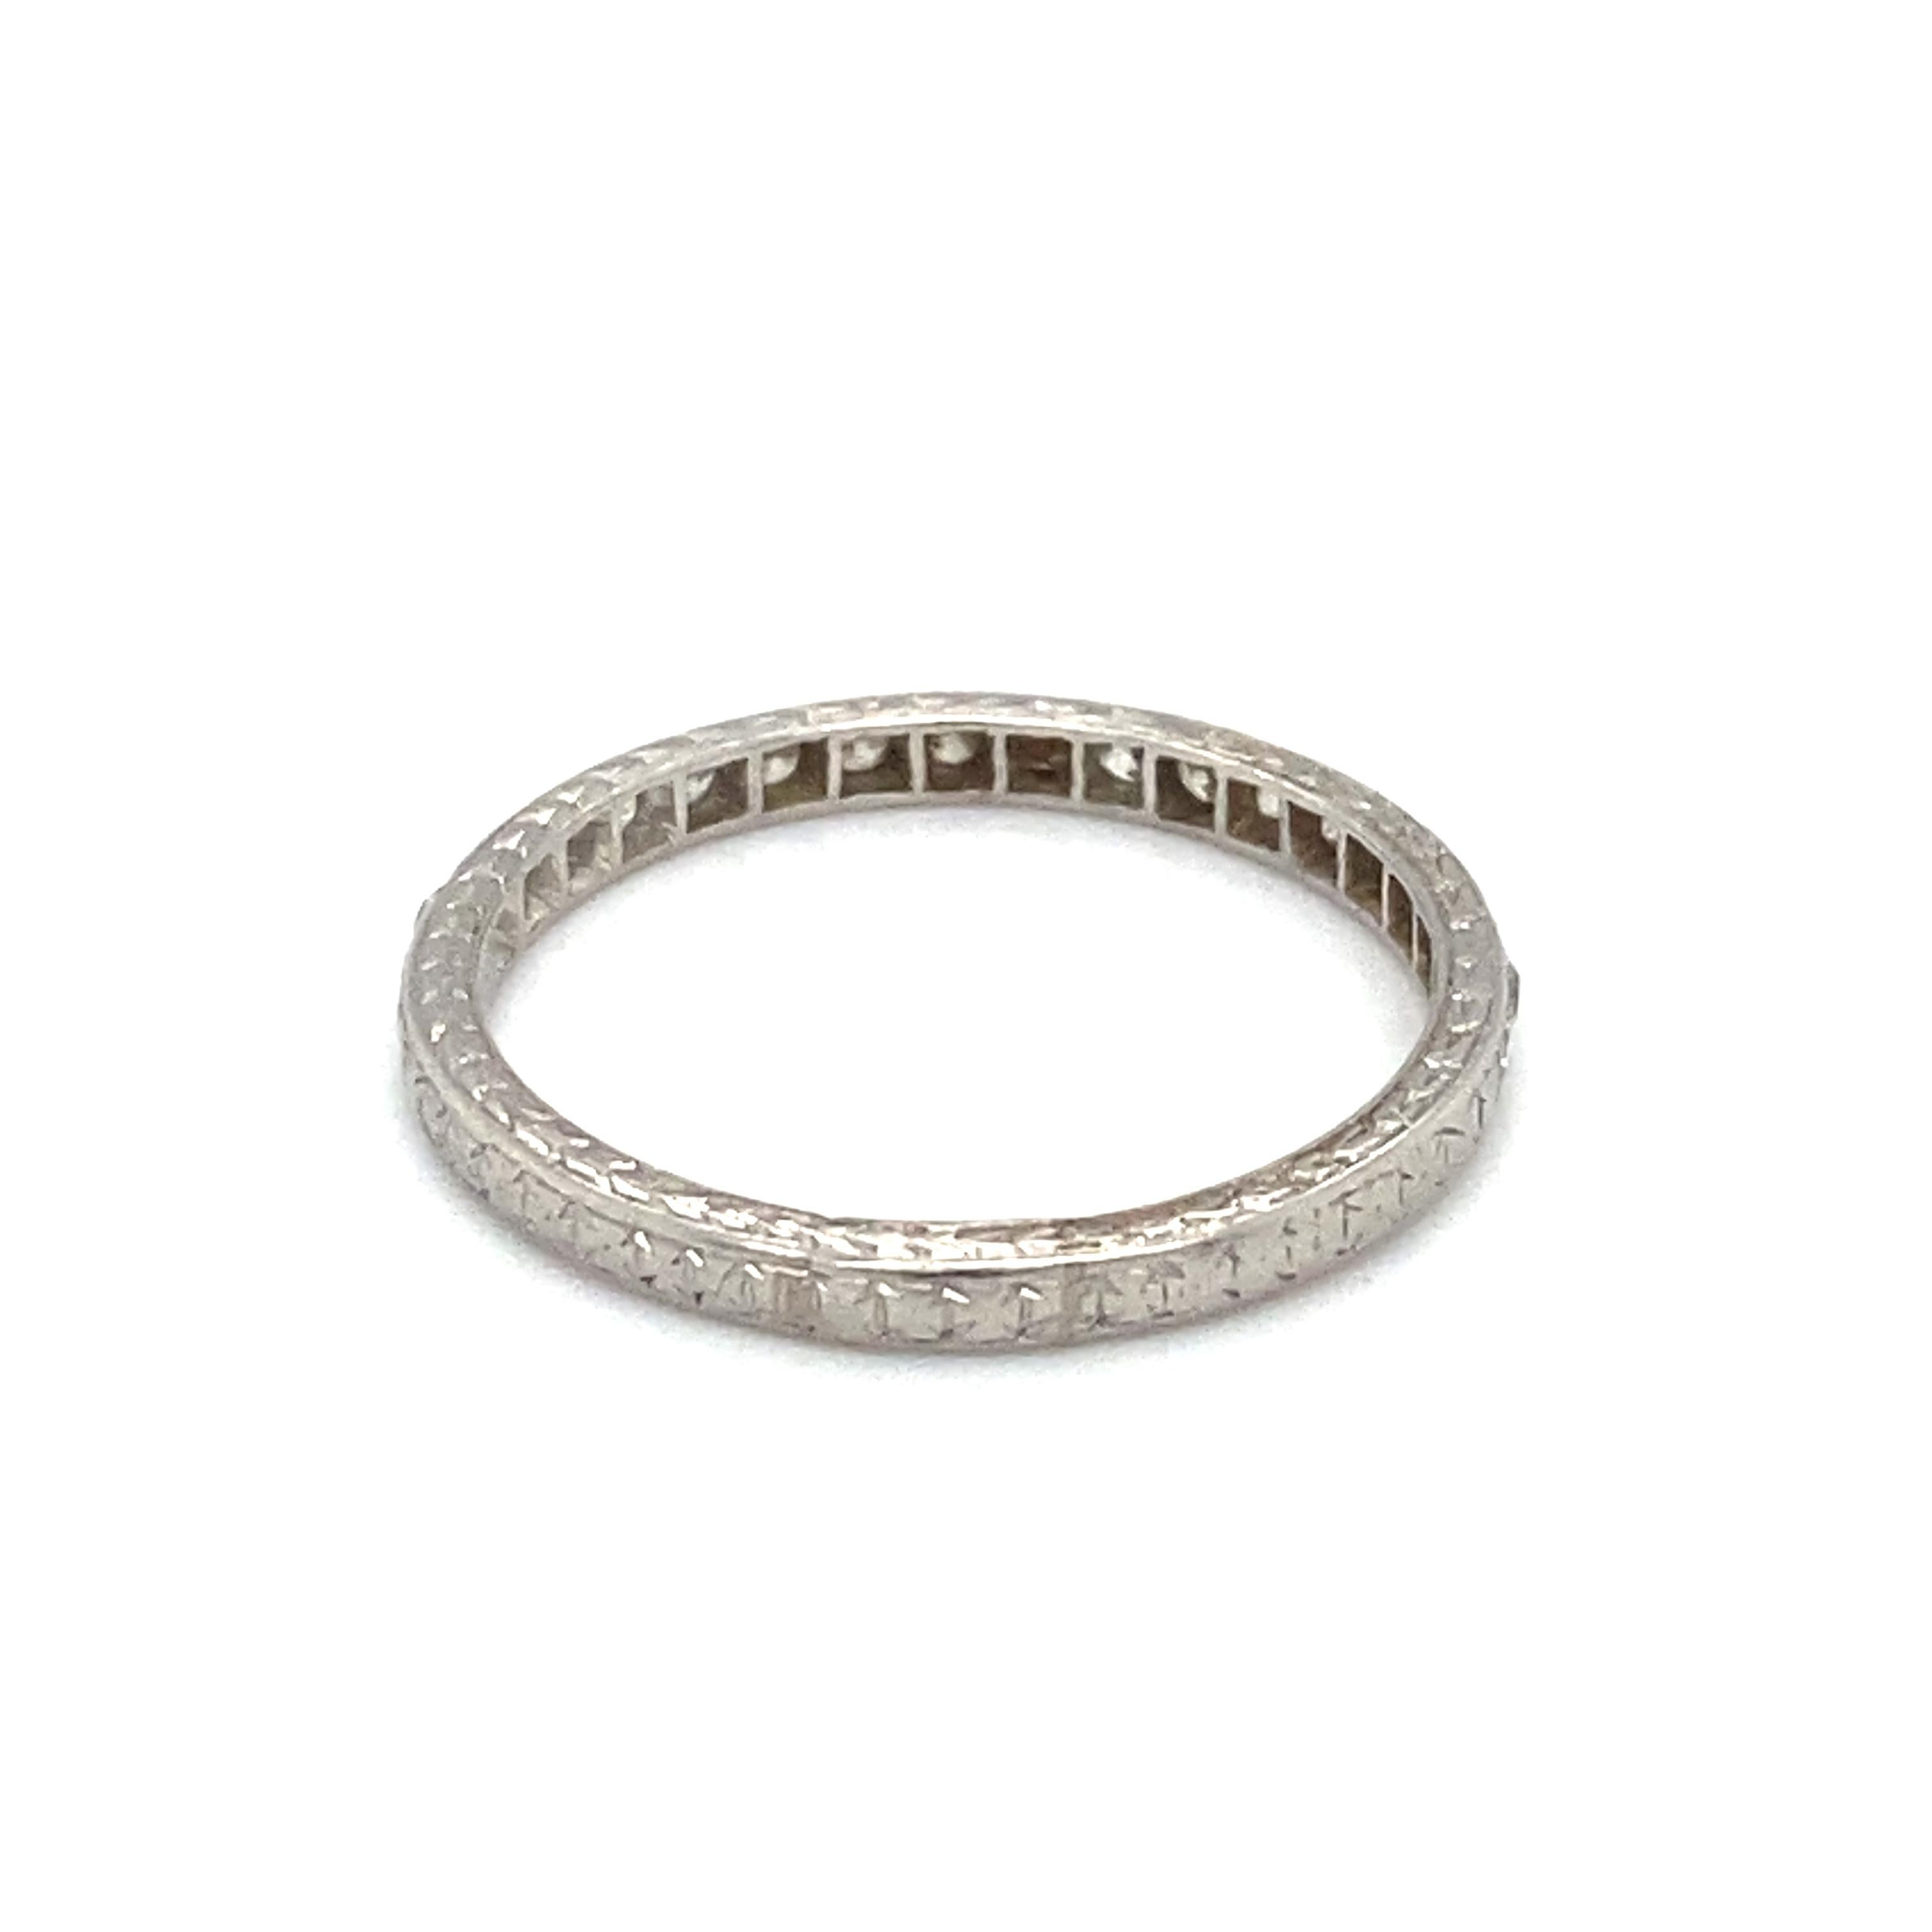 Item Details: This antique anniversary band has etching all around the band with diamond accents. The accent diamonds are bezel set. 

Circa: 1920s
Metal Type: 18 karat white gold
Weight: 2.2 grams
Size: US 7, resizable